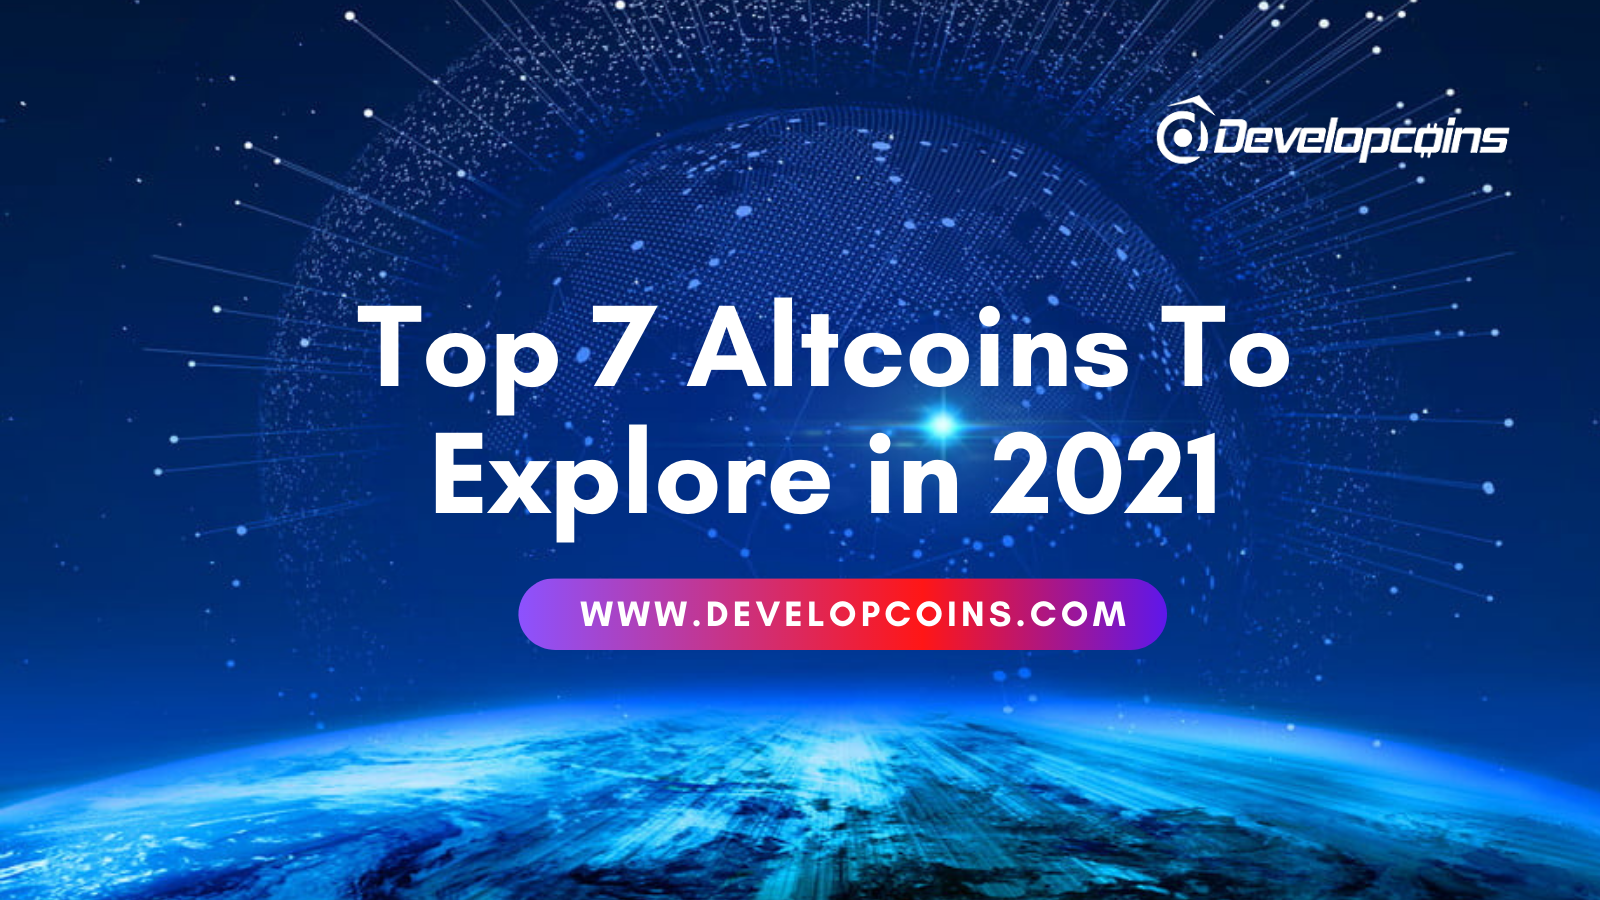 Top 7 Altcoins To Explore in 2021